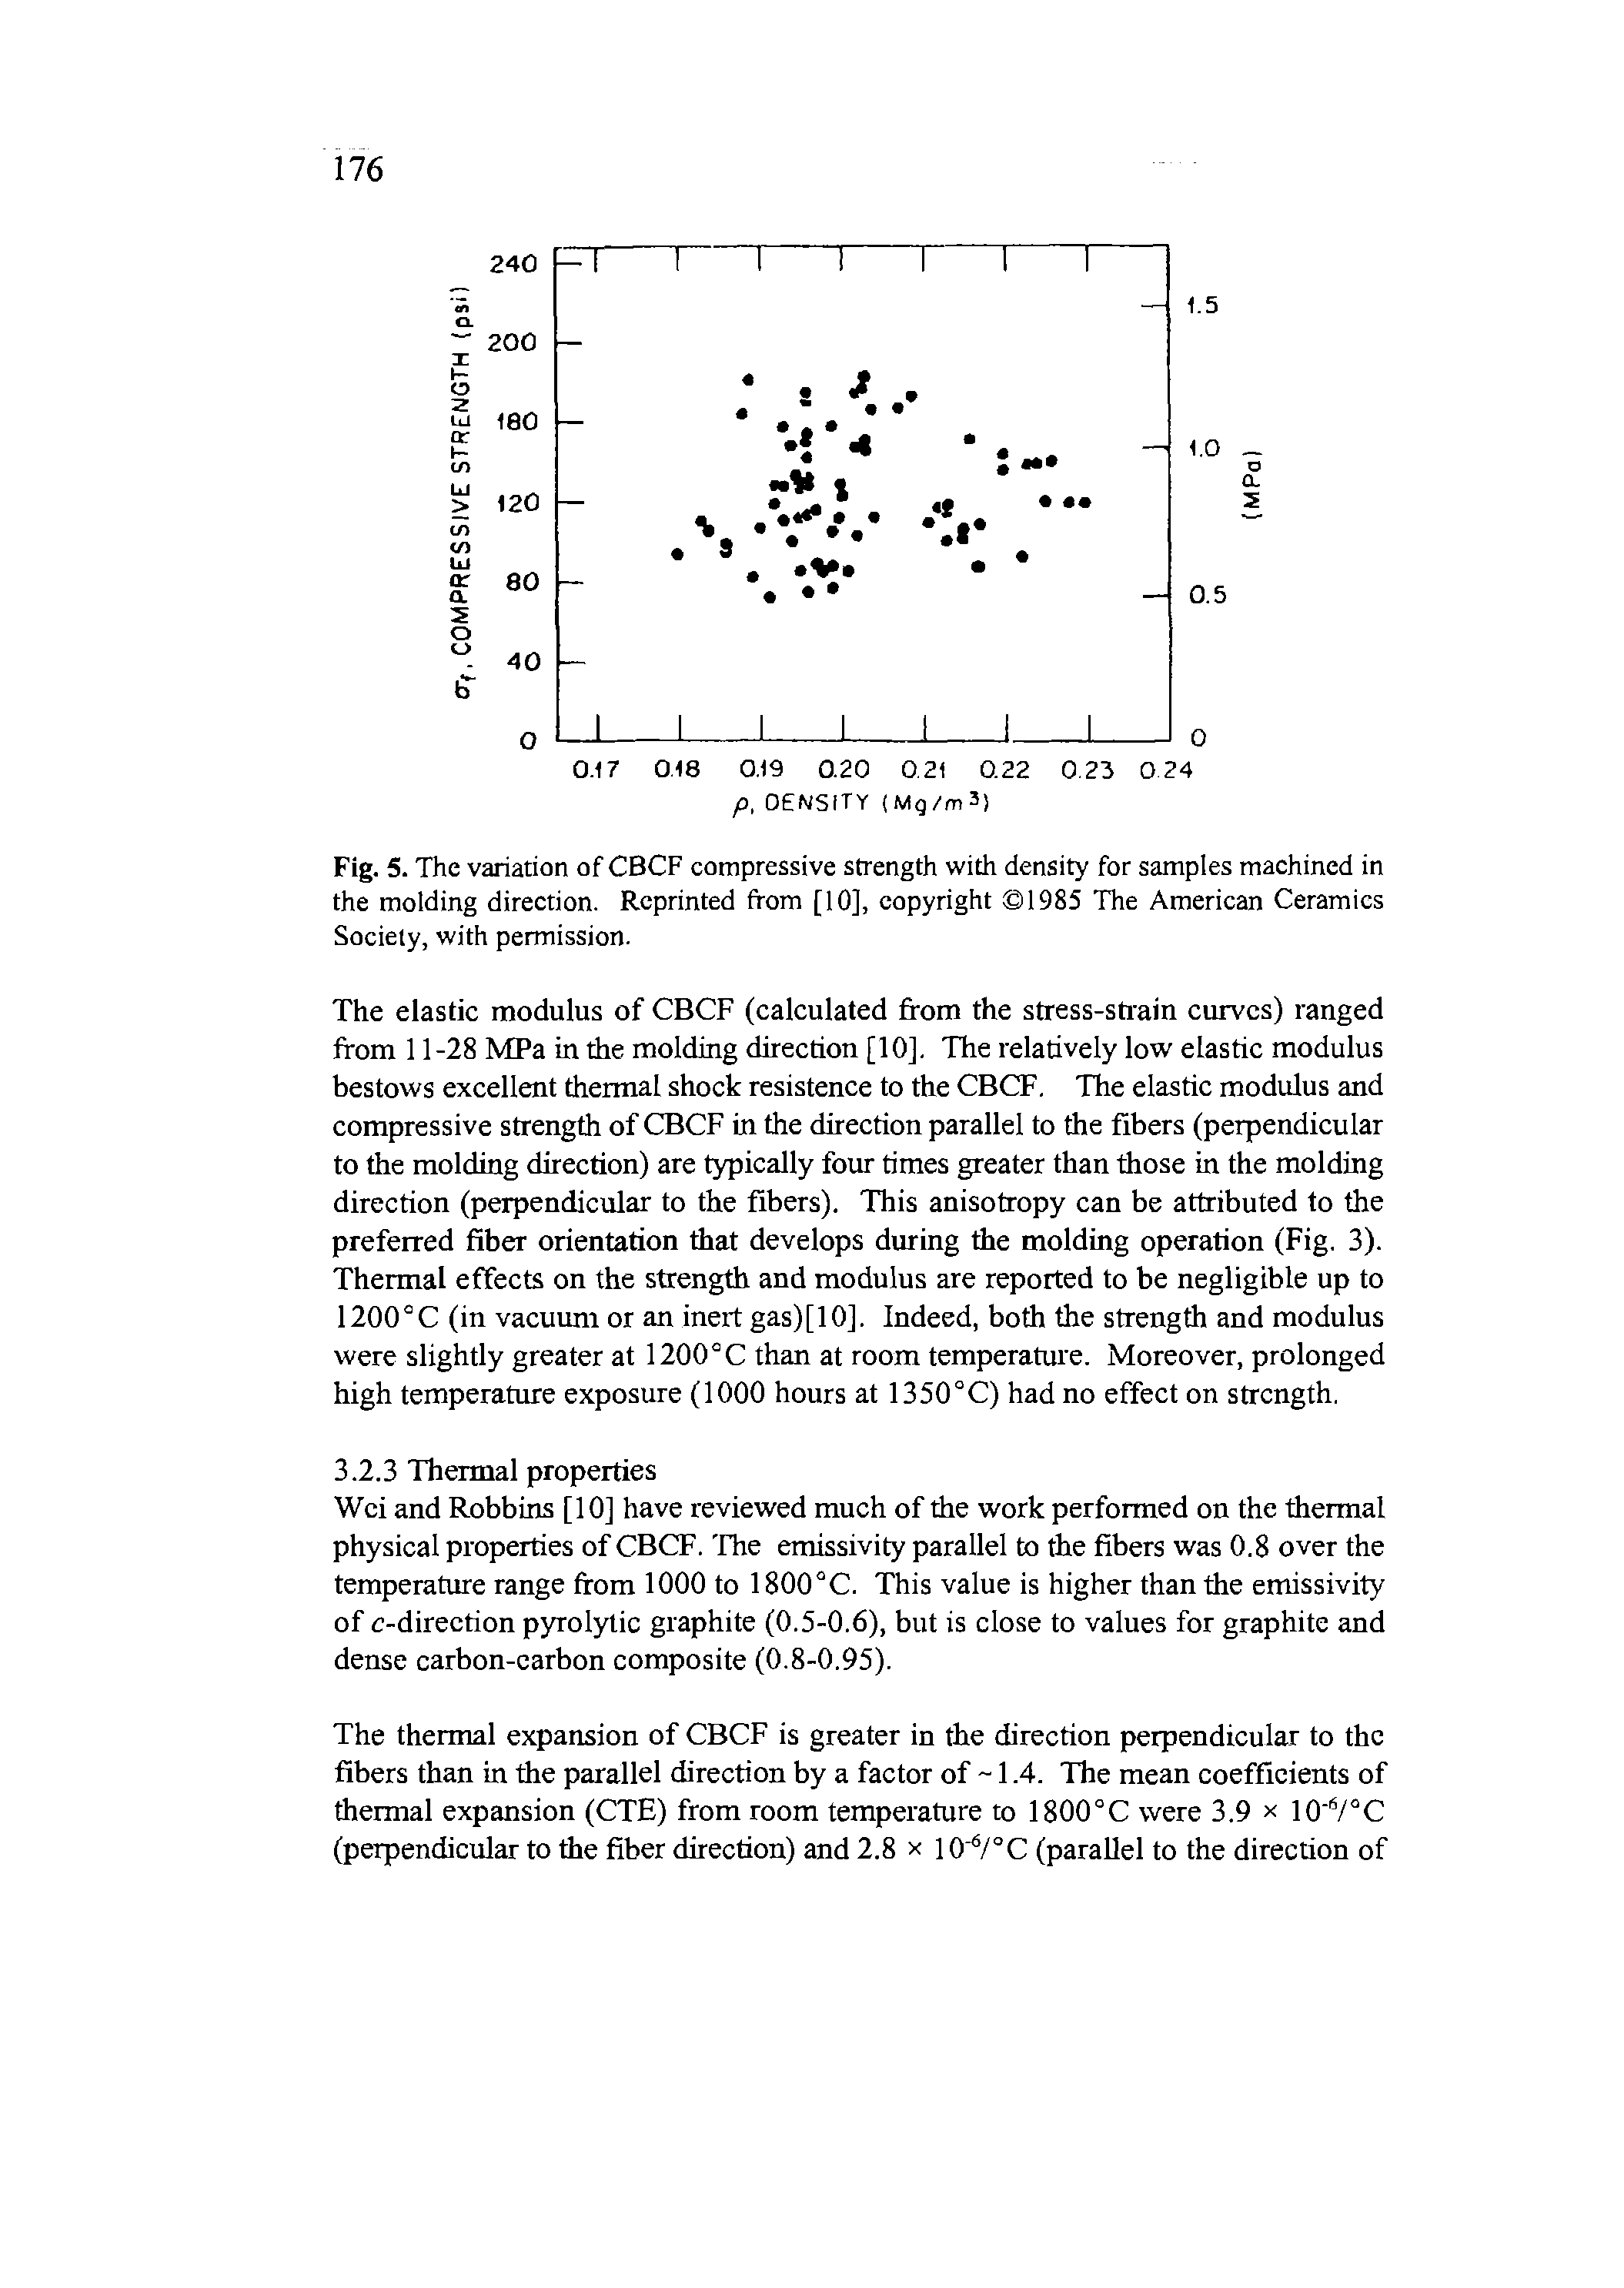 Fig. 5. The variation of CBCF compressive strength with density for samples maehined in the molding direetion. Reprinted from [10], eopyright 1985 The American Ceramics Society, with permission.